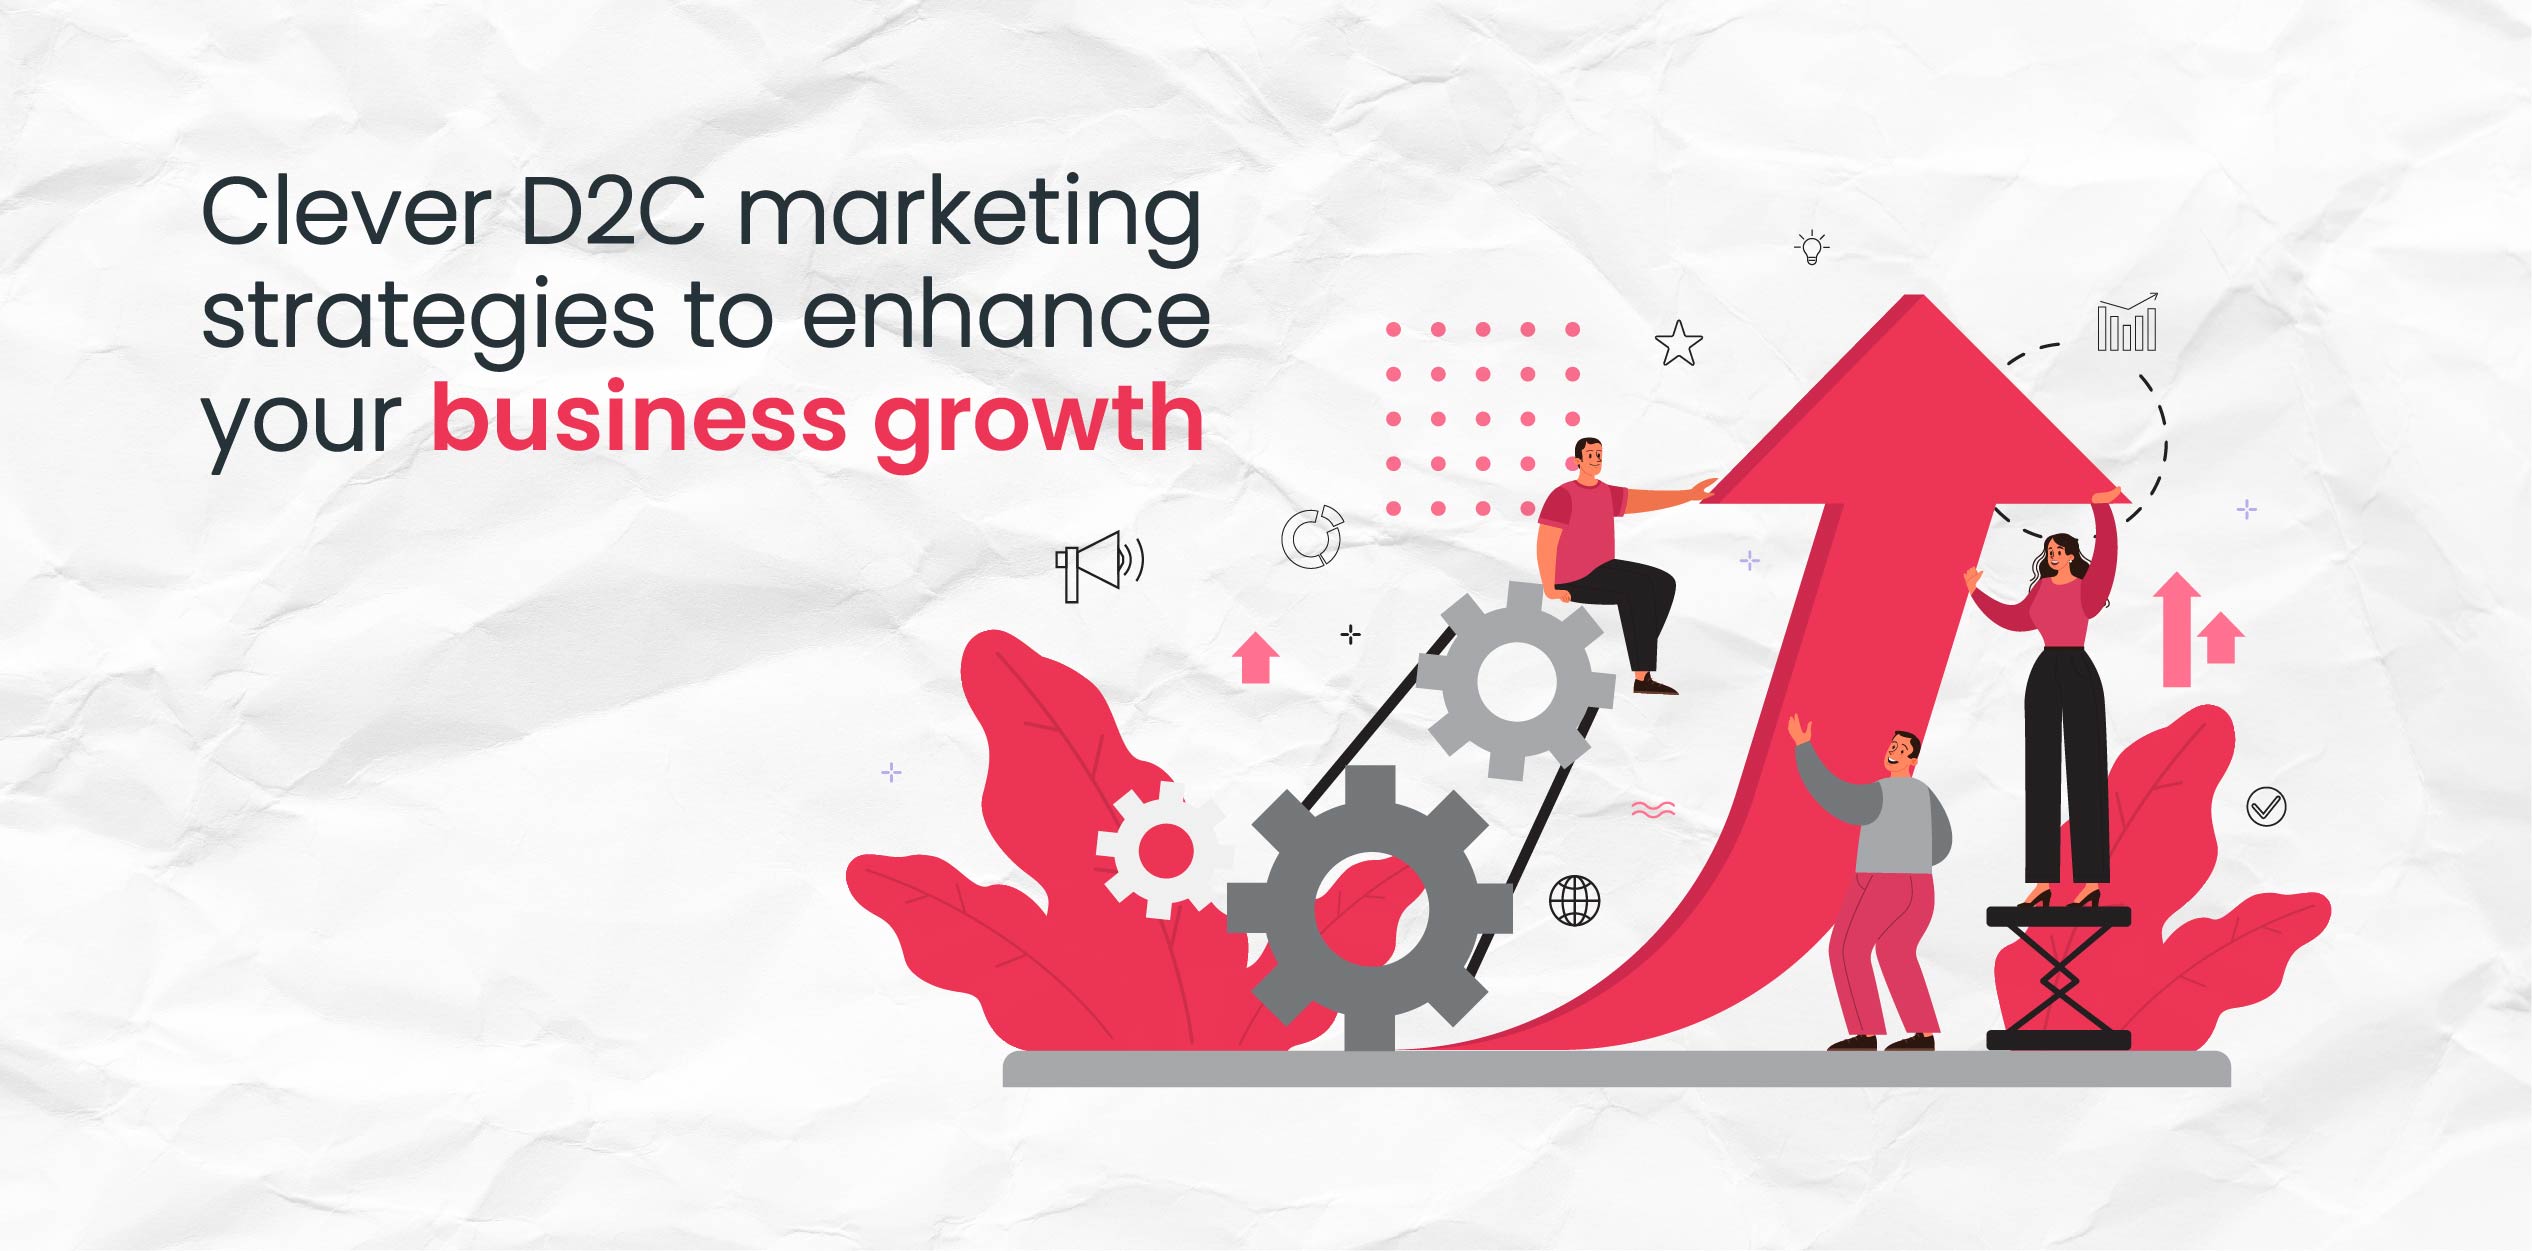 Clever D2C marketing strategies to enhance your business growth